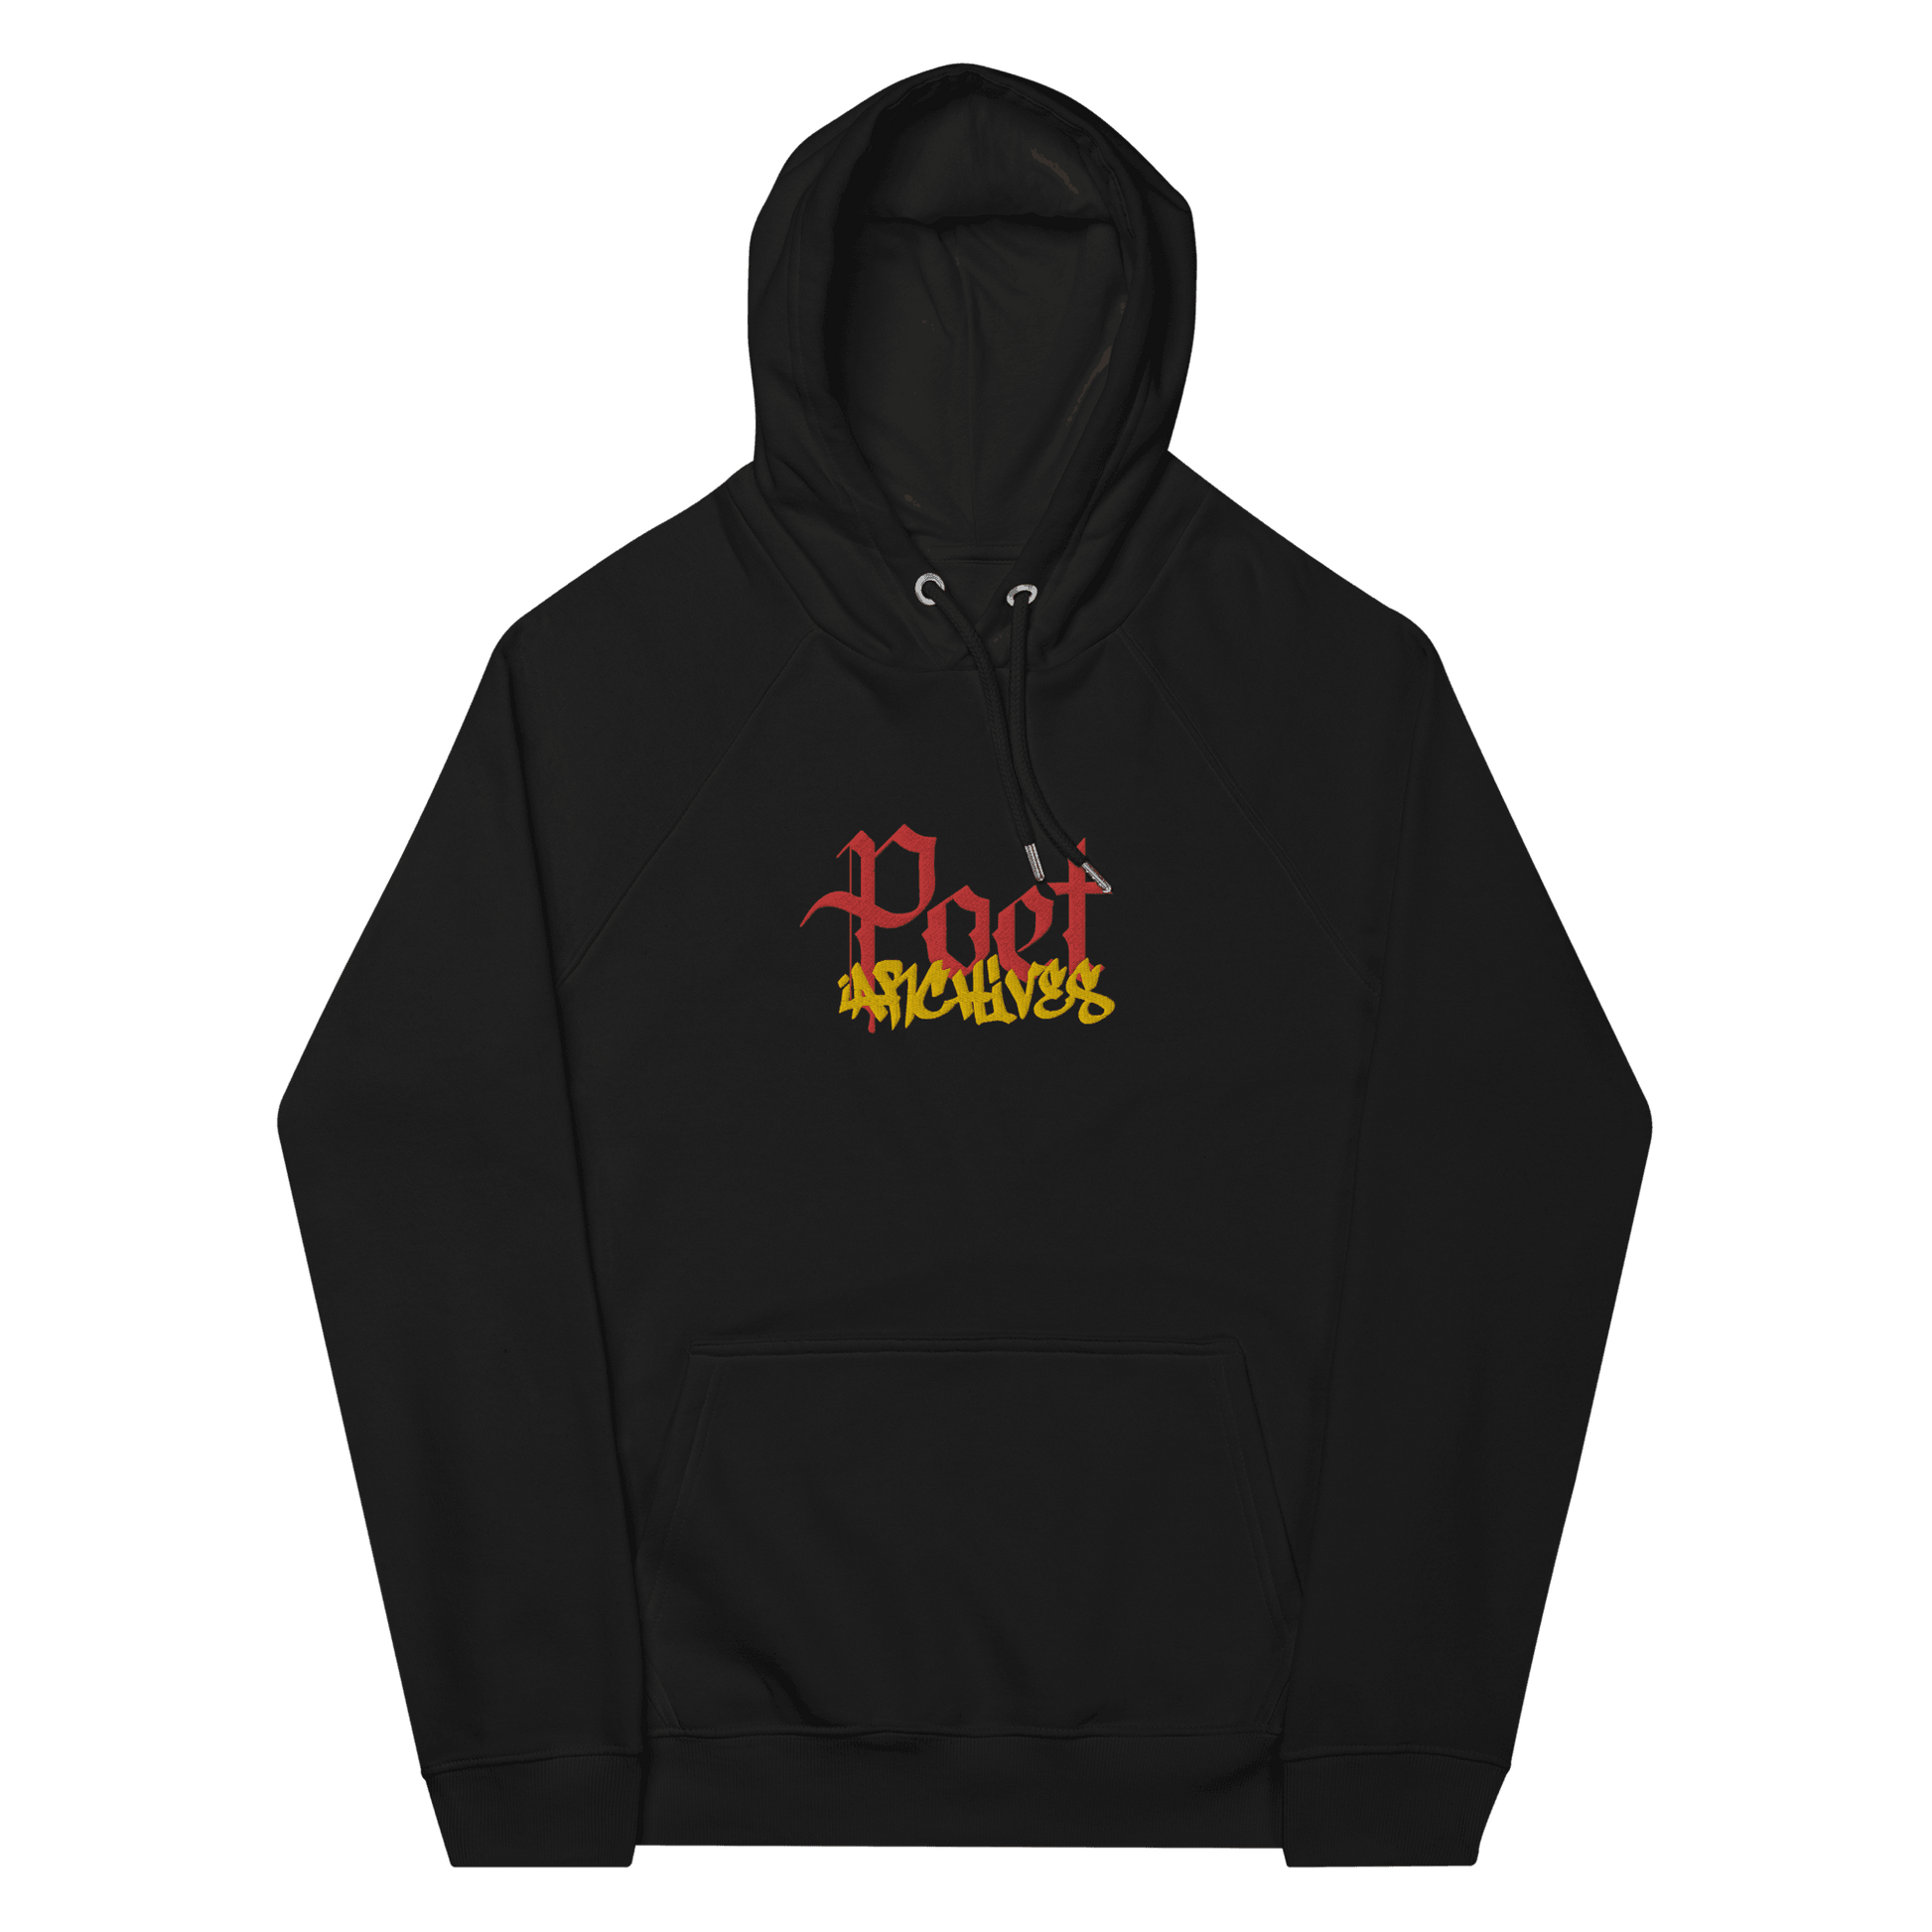 Poet Archives Embroidered Hoodie - Poet Archives